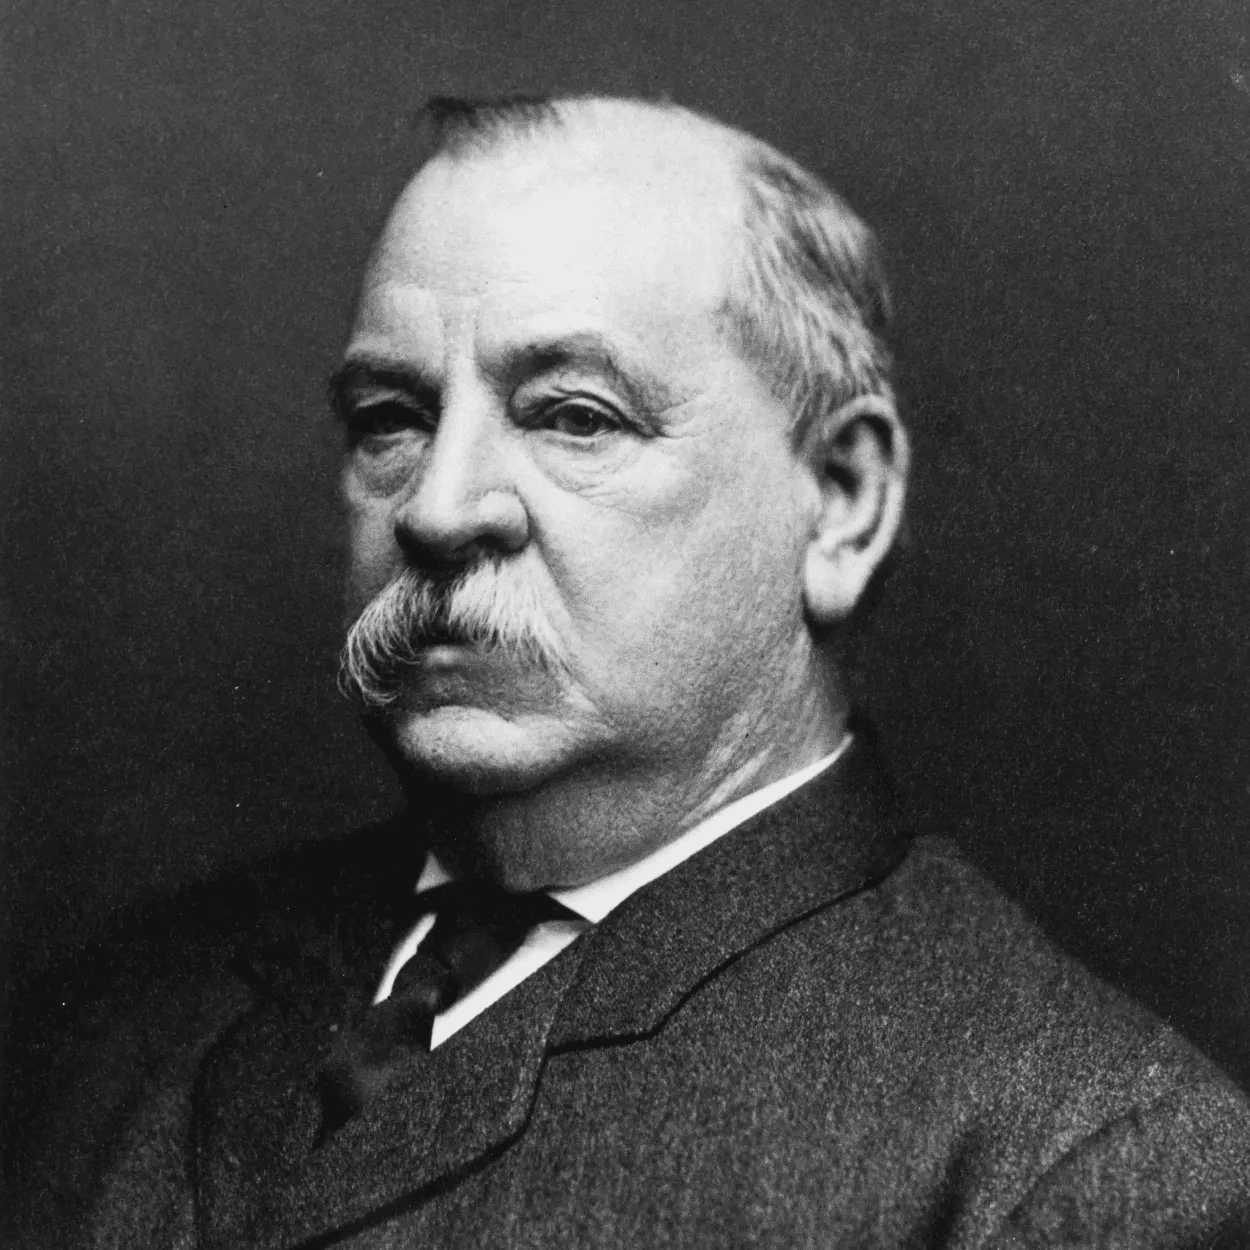 Grover Cleveland (24th President of the United States)